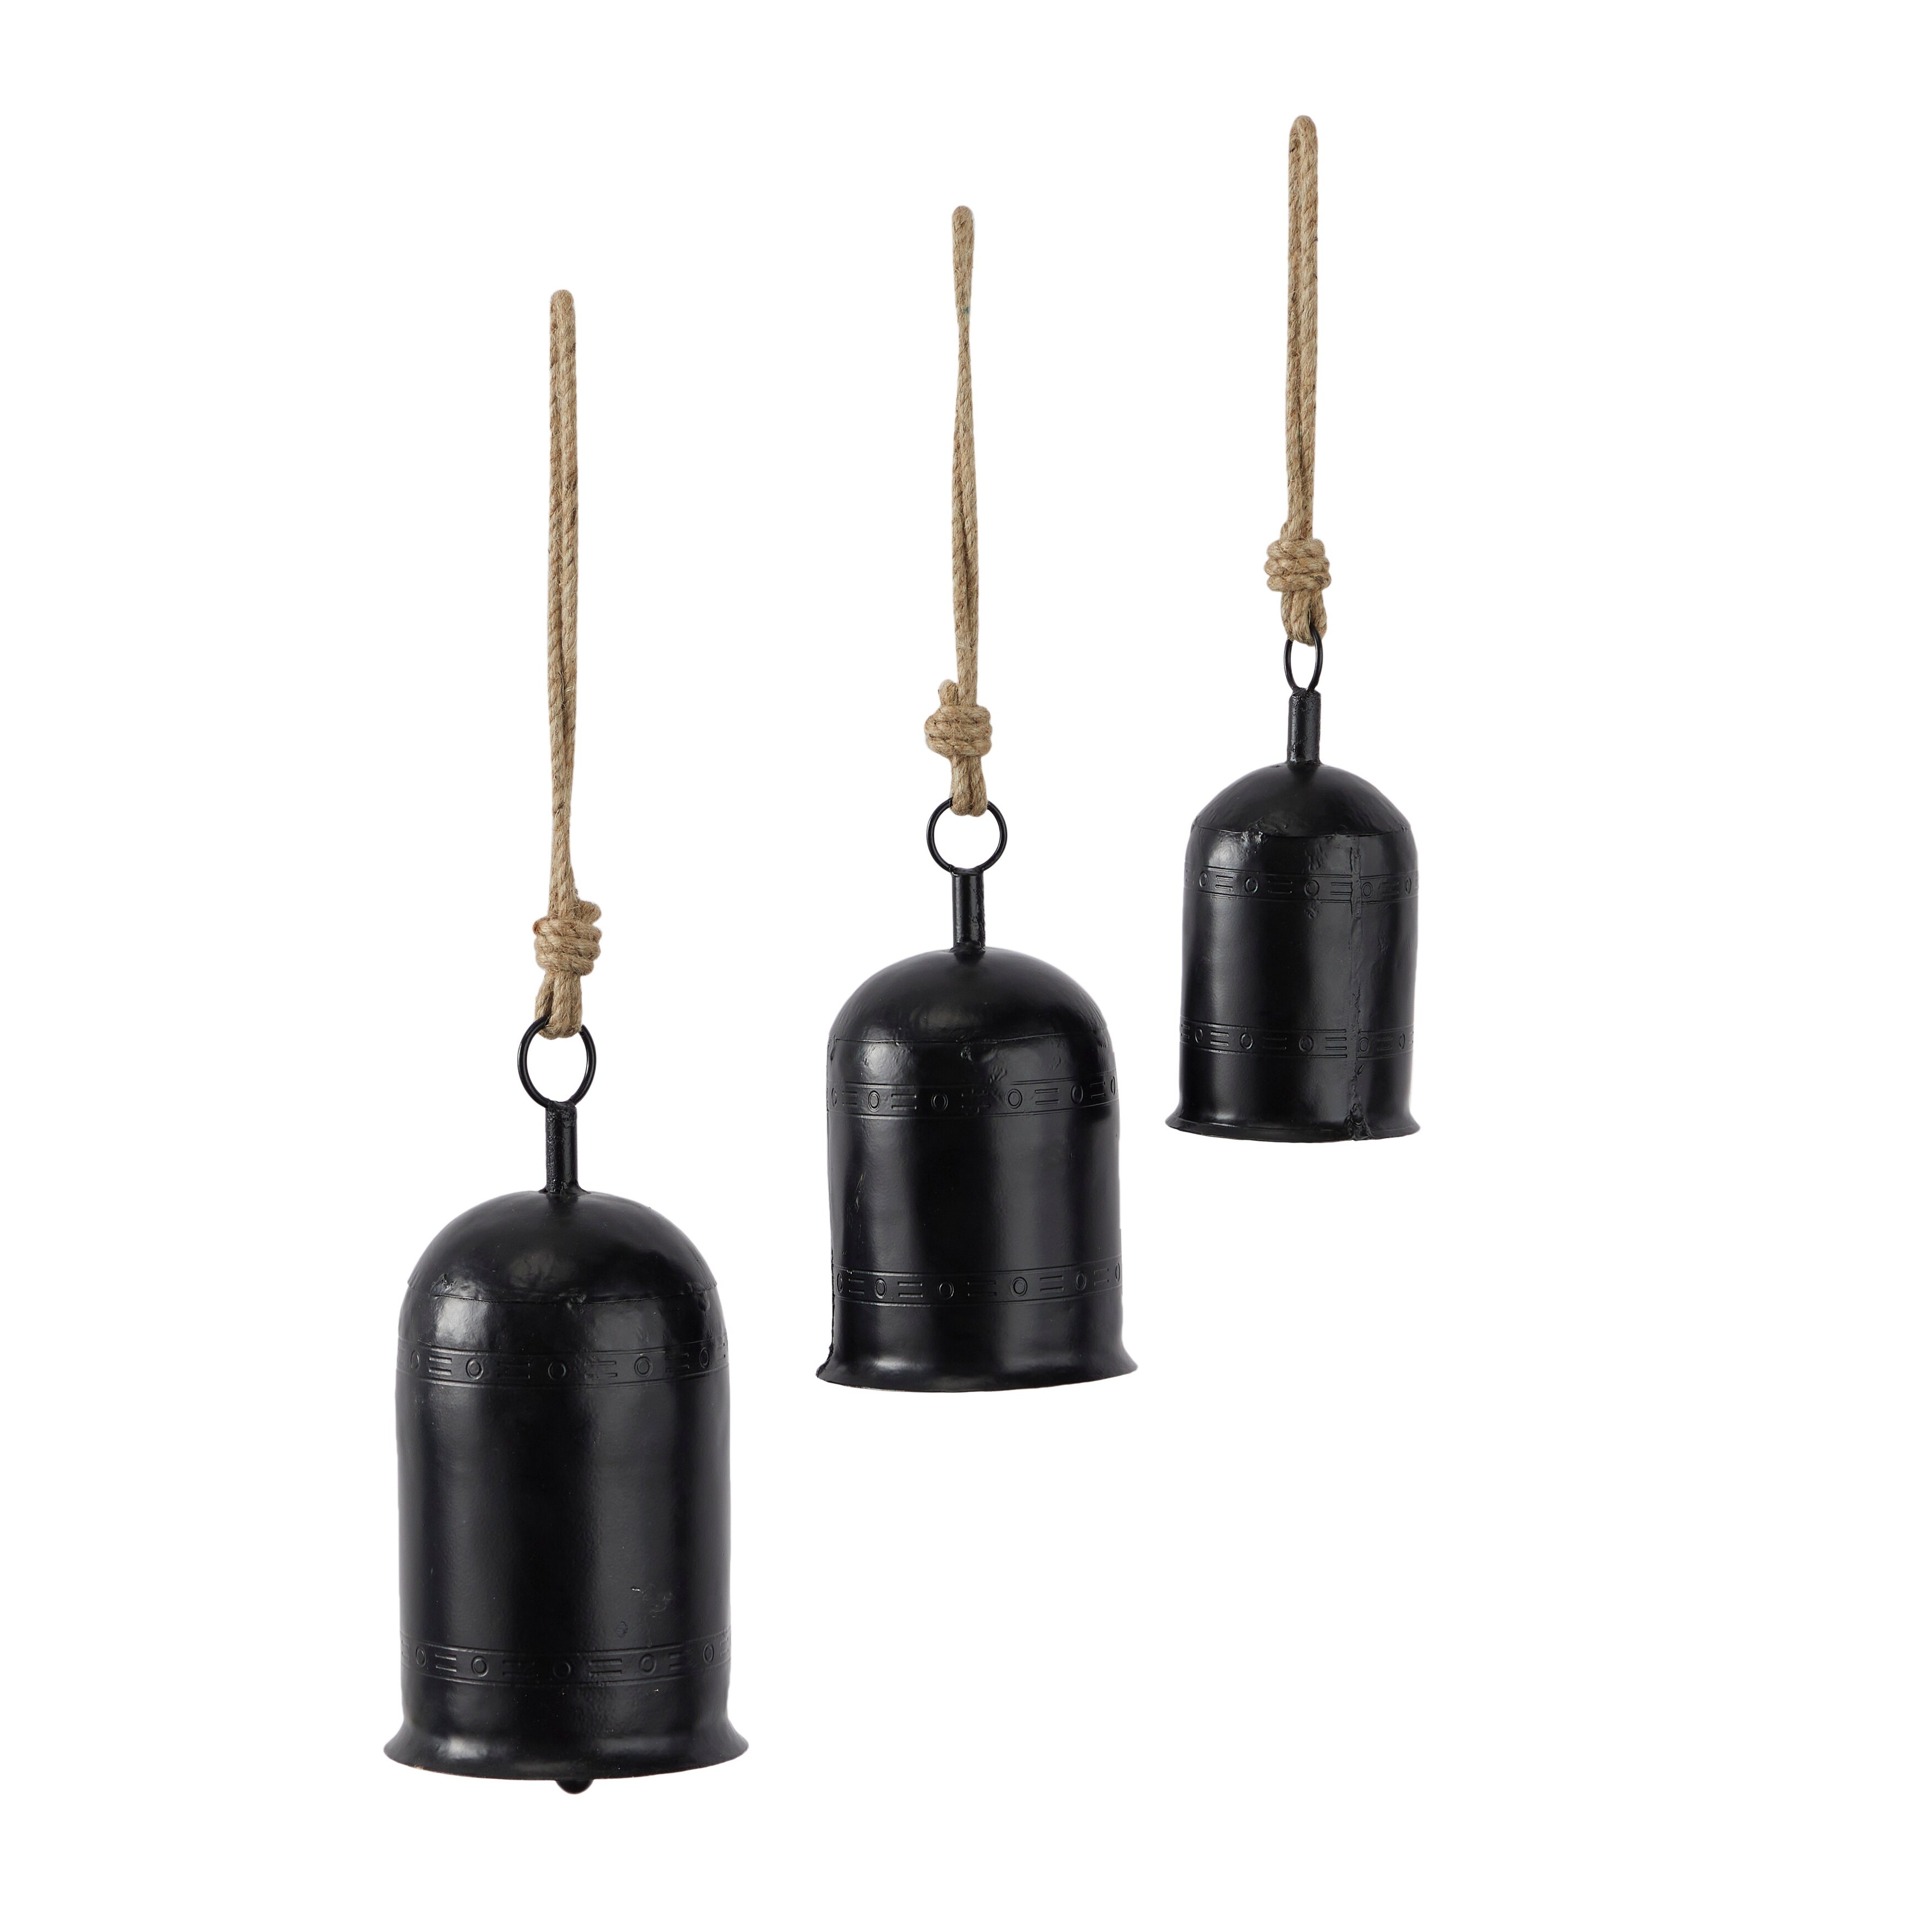 https://ak1.ostkcdn.com/images/products/is/images/direct/f19510a2e0df6d60075f0ba5f394d1f268c3c823/Bohemian-Rustic-Decorative-Tibetan-Inspired-Cow-Bell-Collection---Silver%2C-Gold%2C-Bronze-and-Matte-Black.jpg